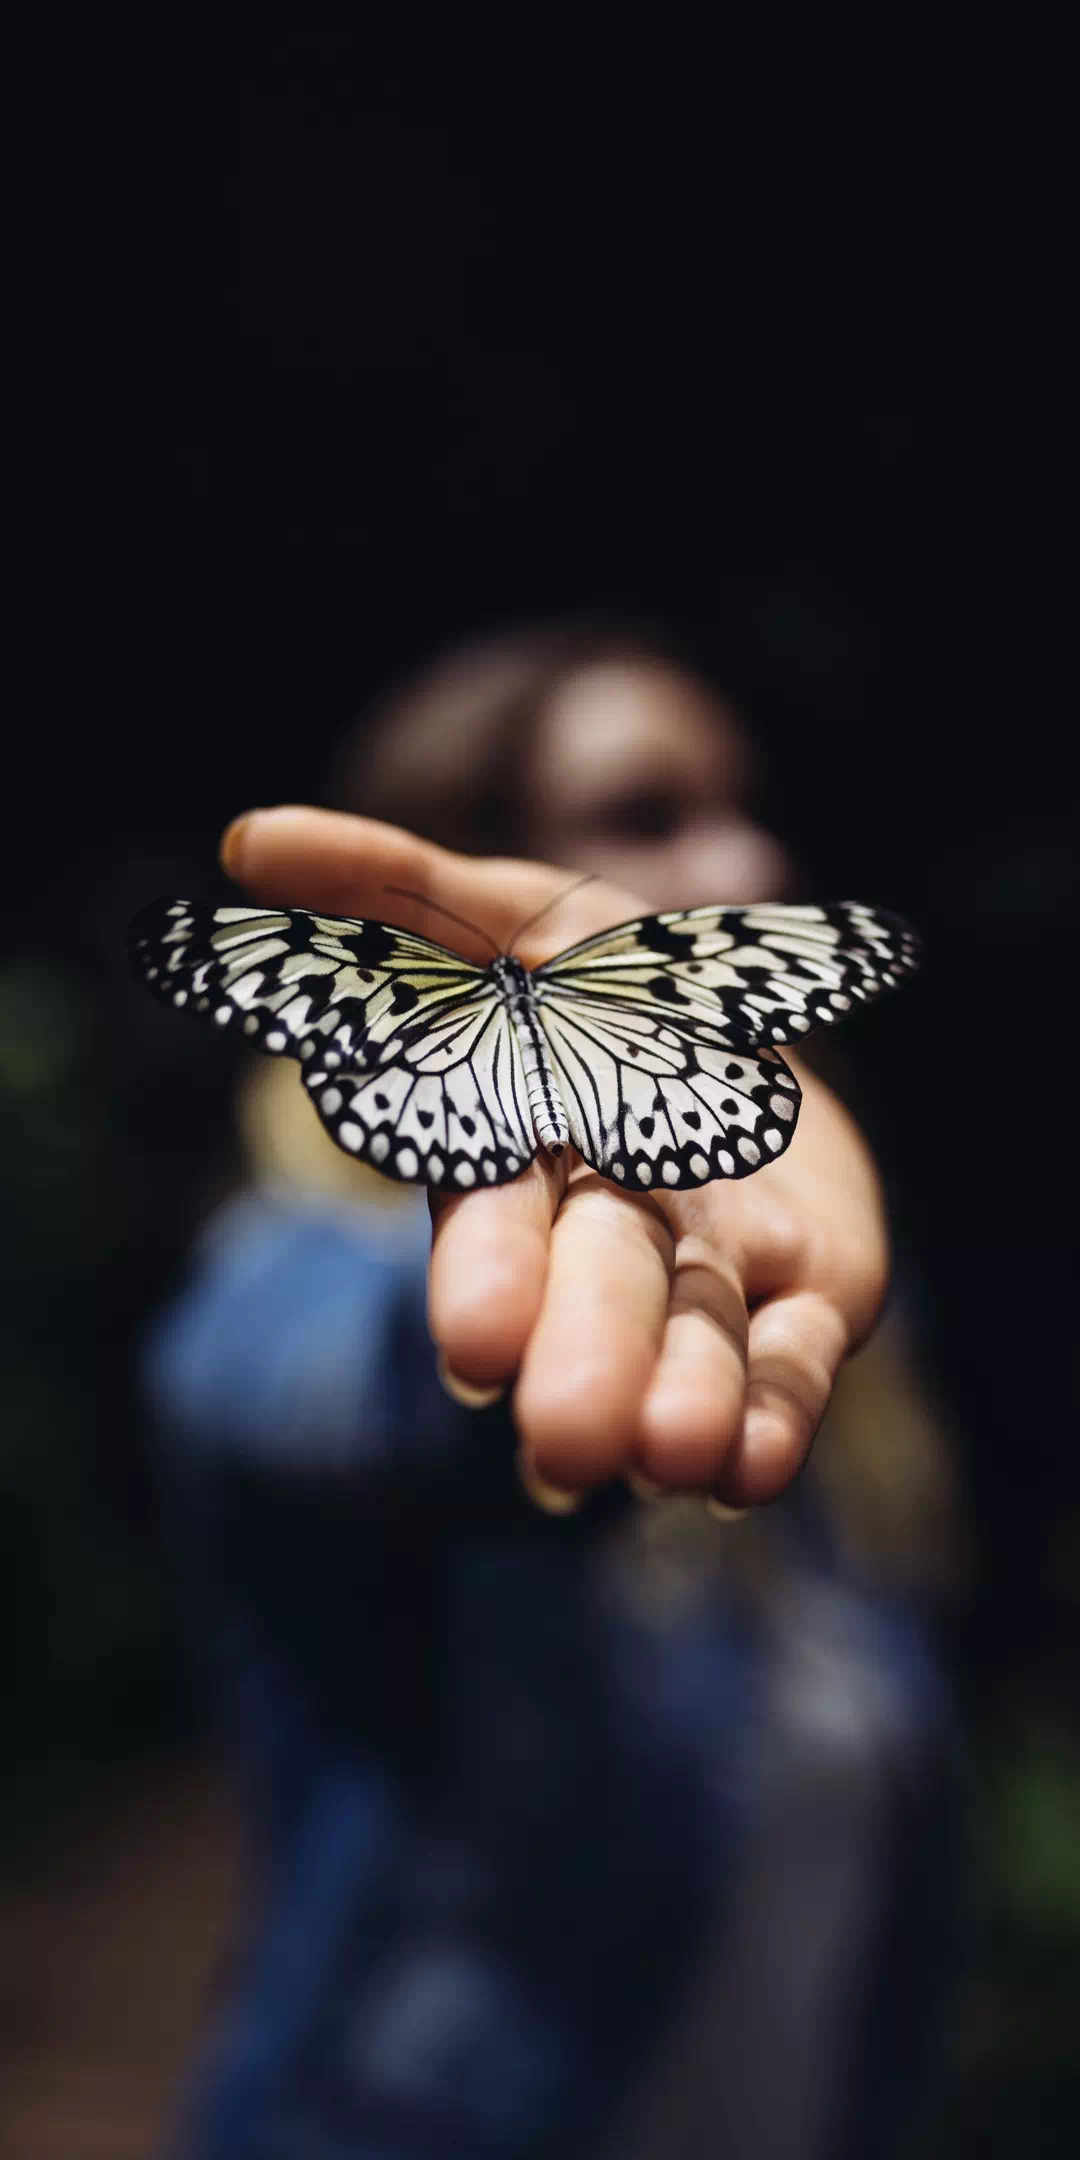 thumb for Butterfly On Hand Wallpaper